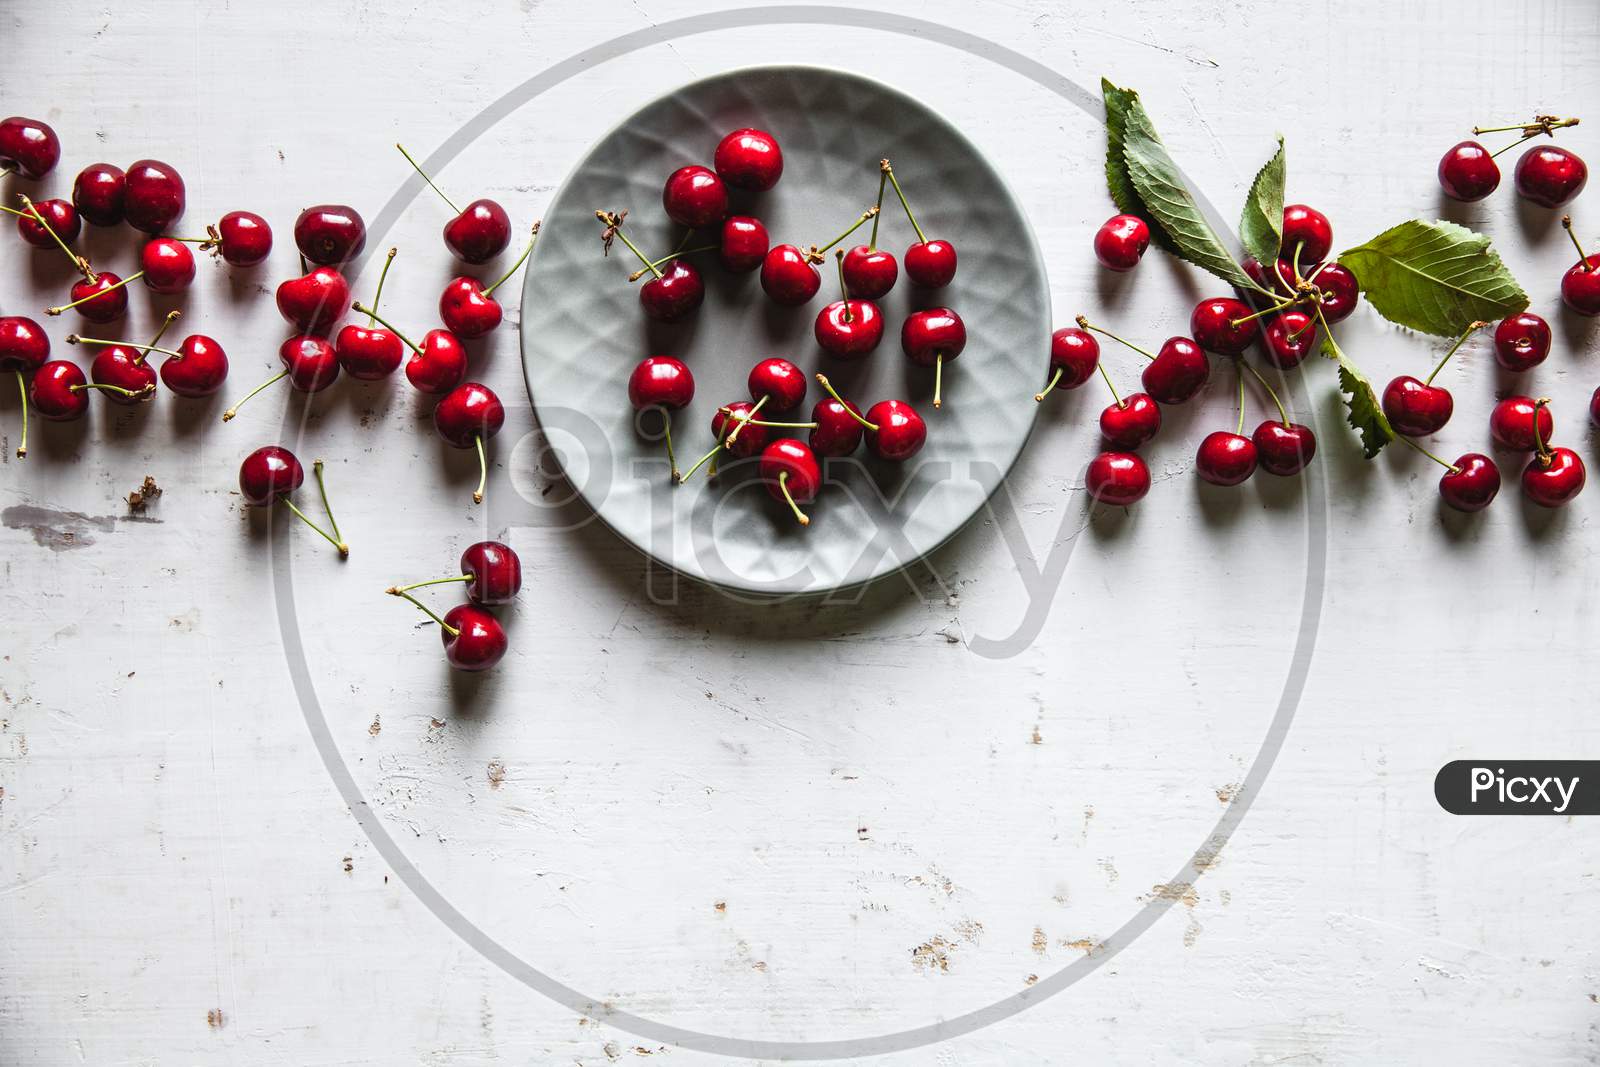 Sweet Cherries In A Plate On An Old White Background, Healthy Food, Fruits